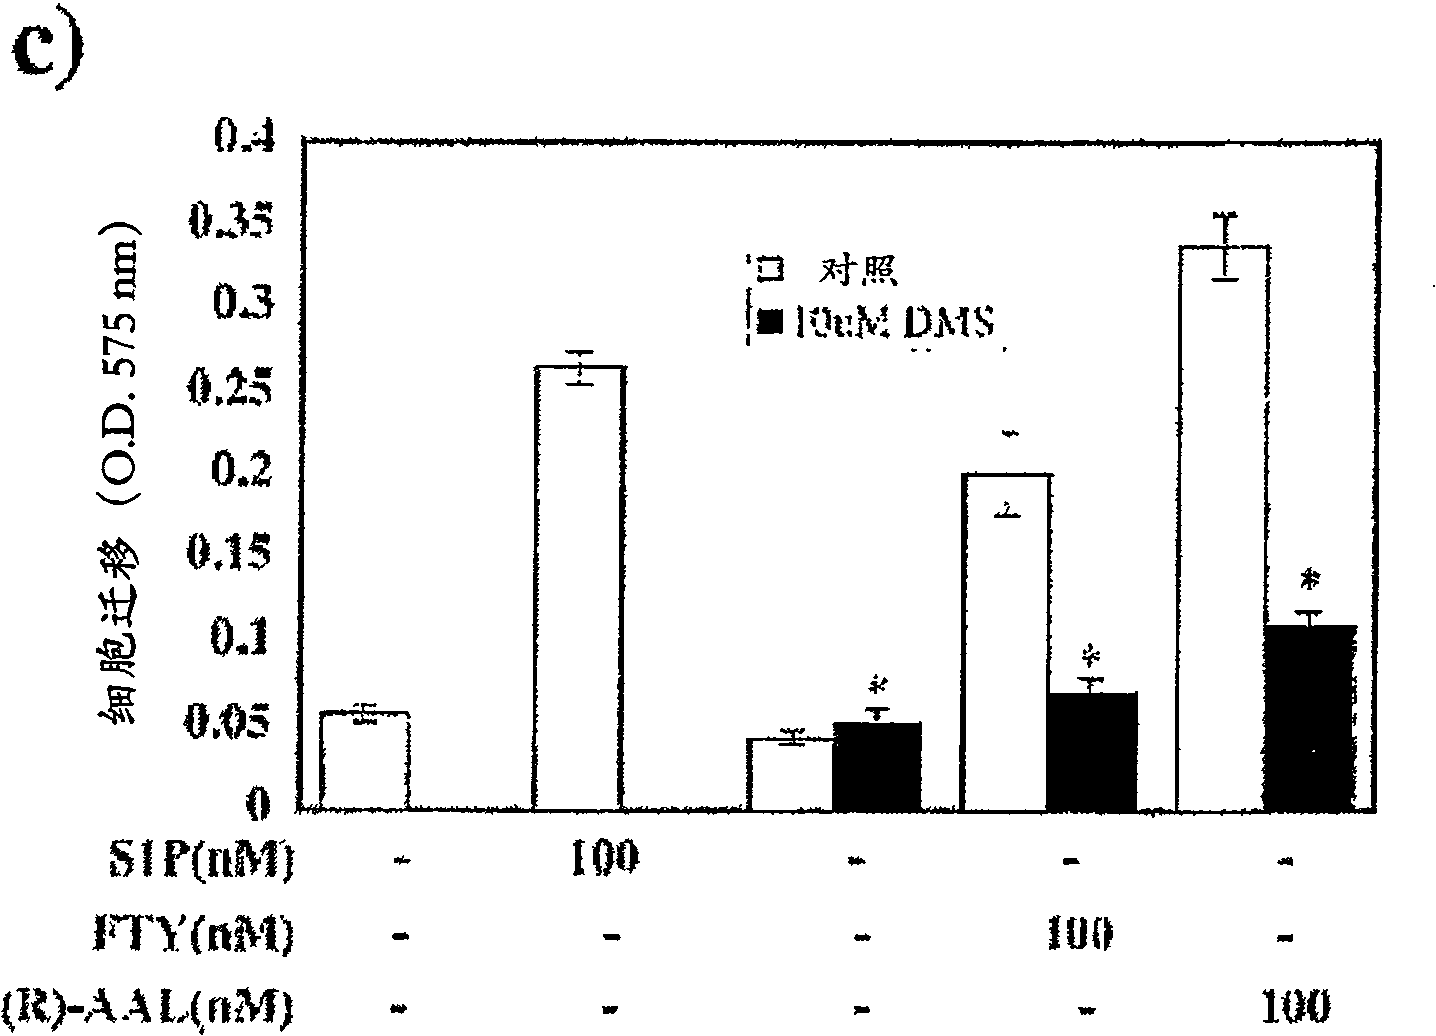 Methods of inhibiting vascular permeability and apoptosis